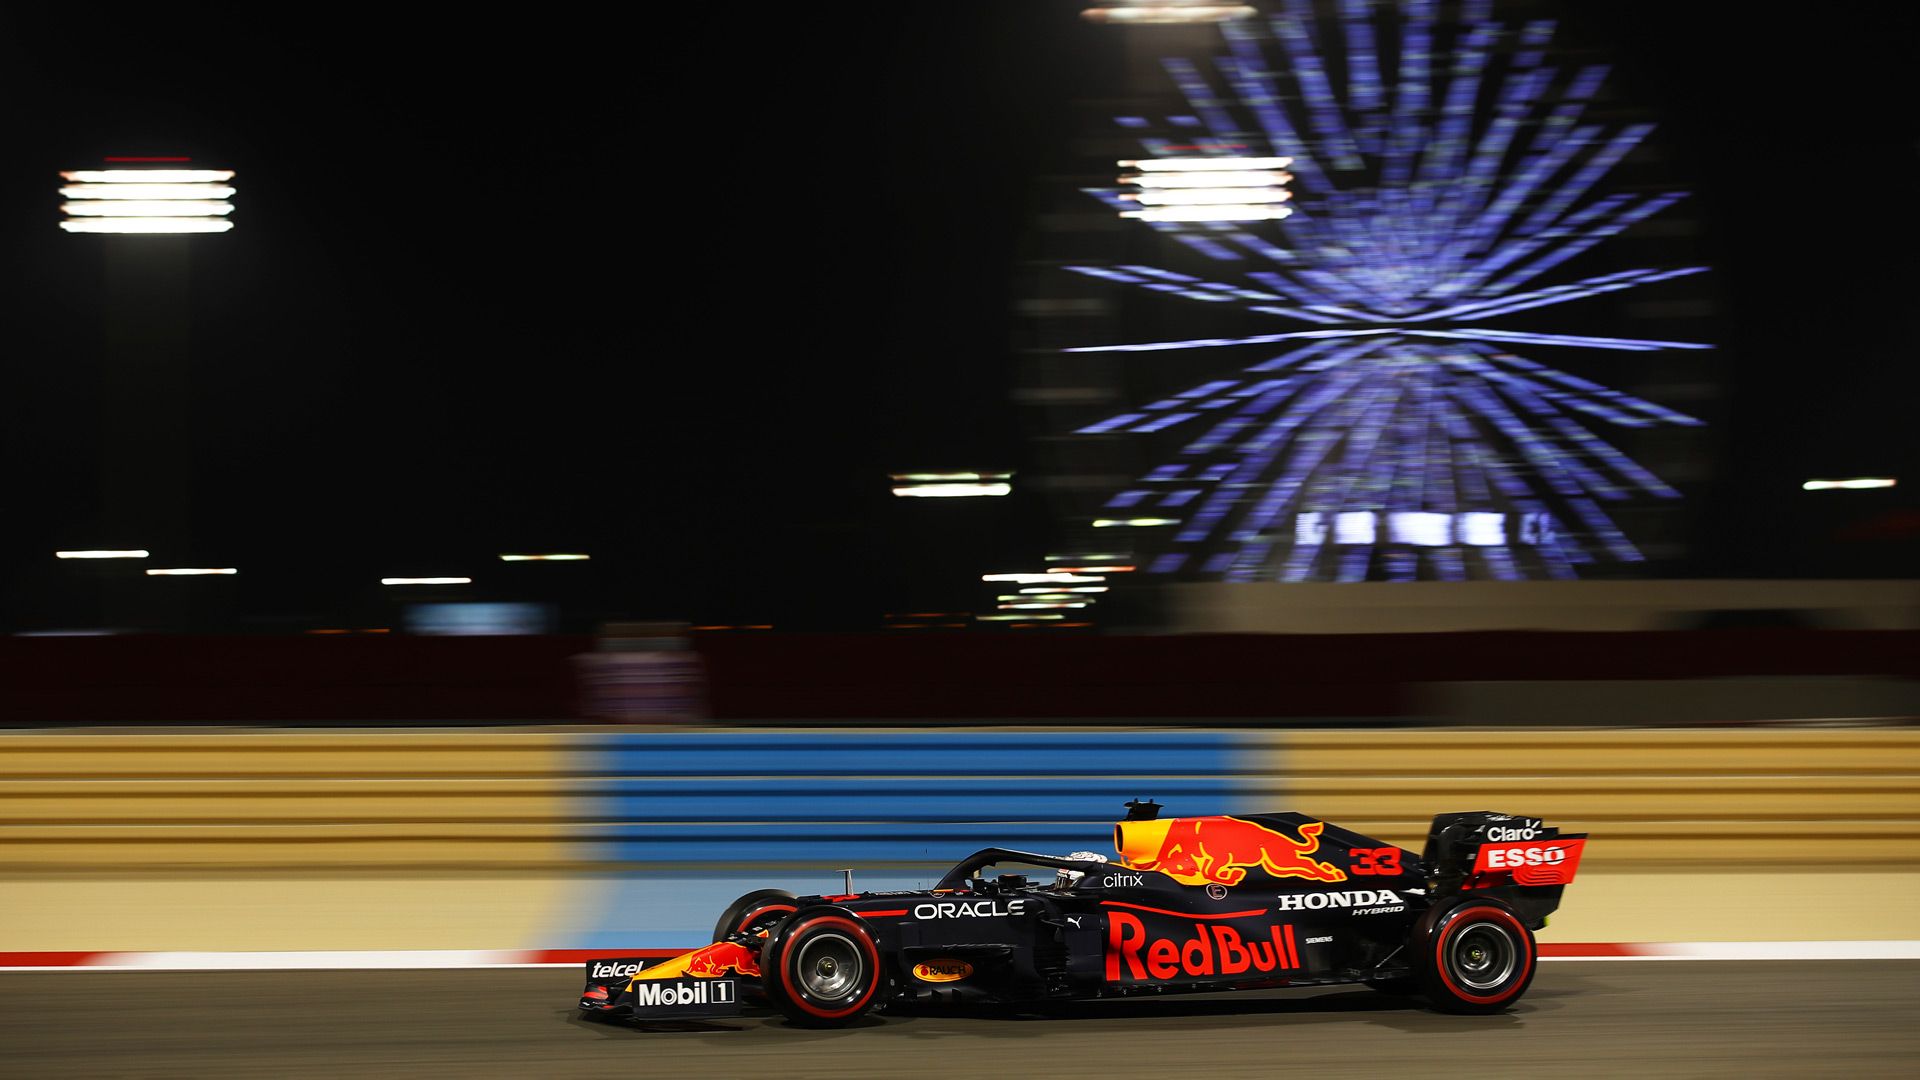 FP2 report and highlights from the 2021 Bahrain Grand Prix: Max Verstappen heads Norris to complete clean sweep of Friday sessions in Bahrain. Formula 1®